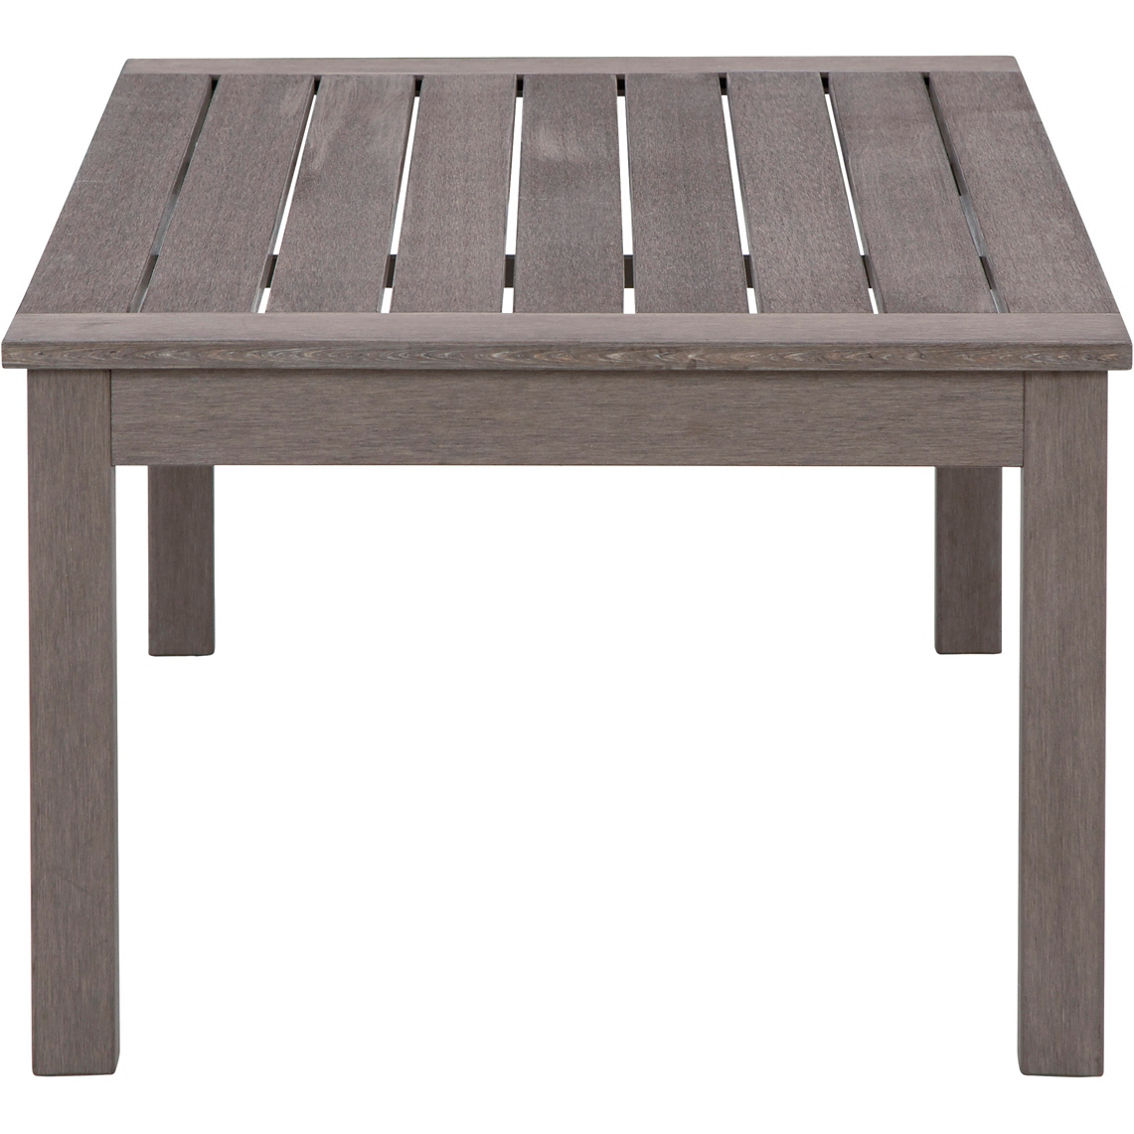 Signature Design by Ashley Hillside Barn Outdoor Coffee Table - Image 2 of 5